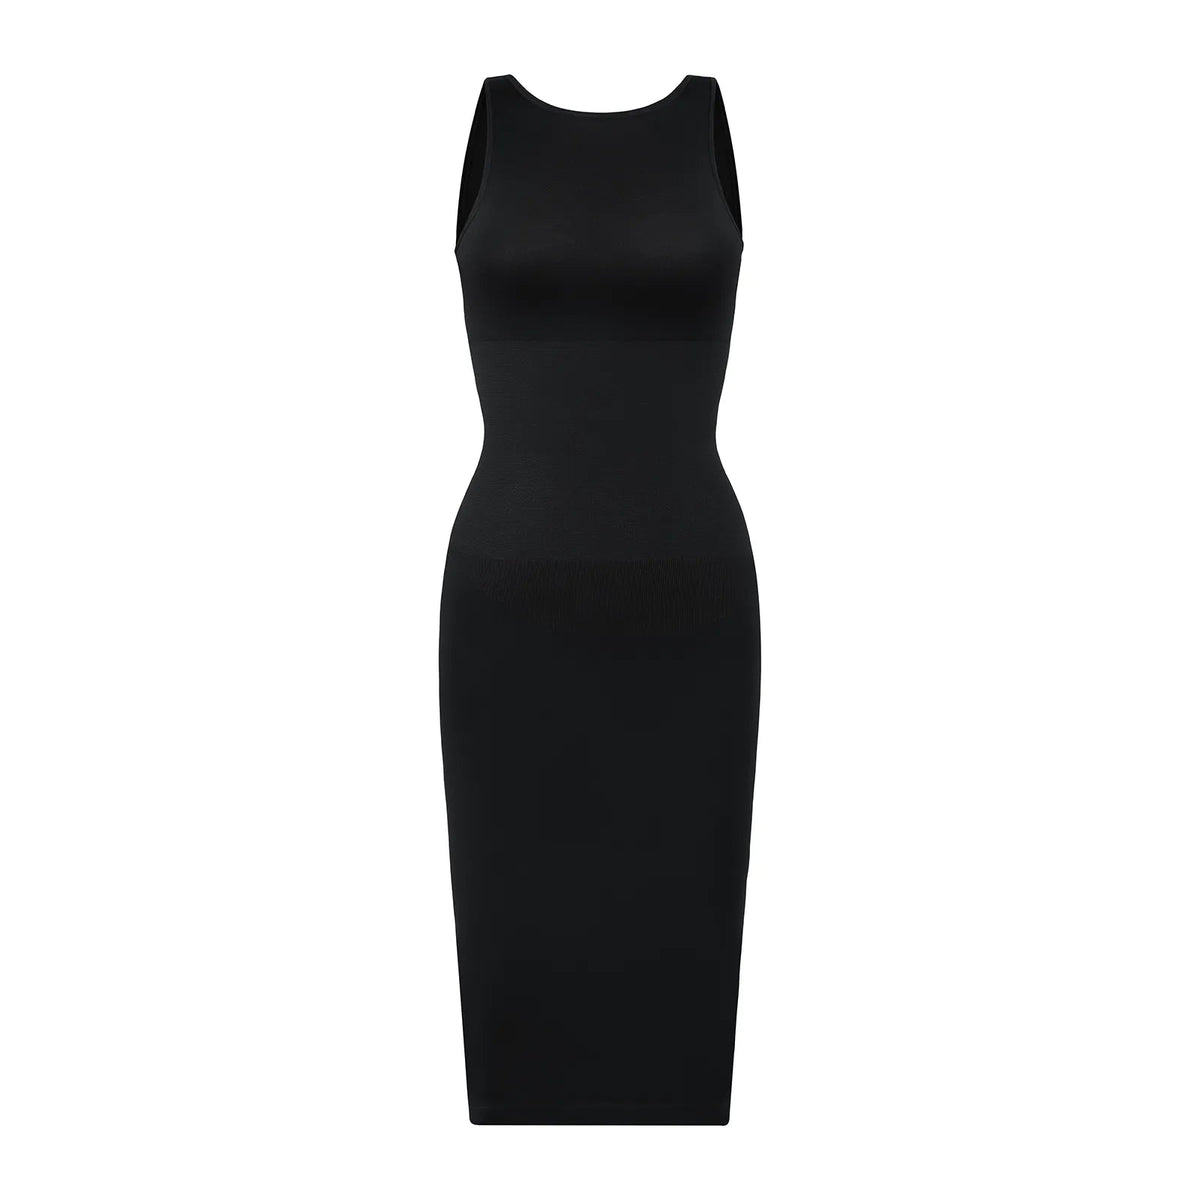 Dusk Hues Built In Shapewear Cotton Bodycon Dress | Hypoallergenic - Allergy Friendly - Naturally Free